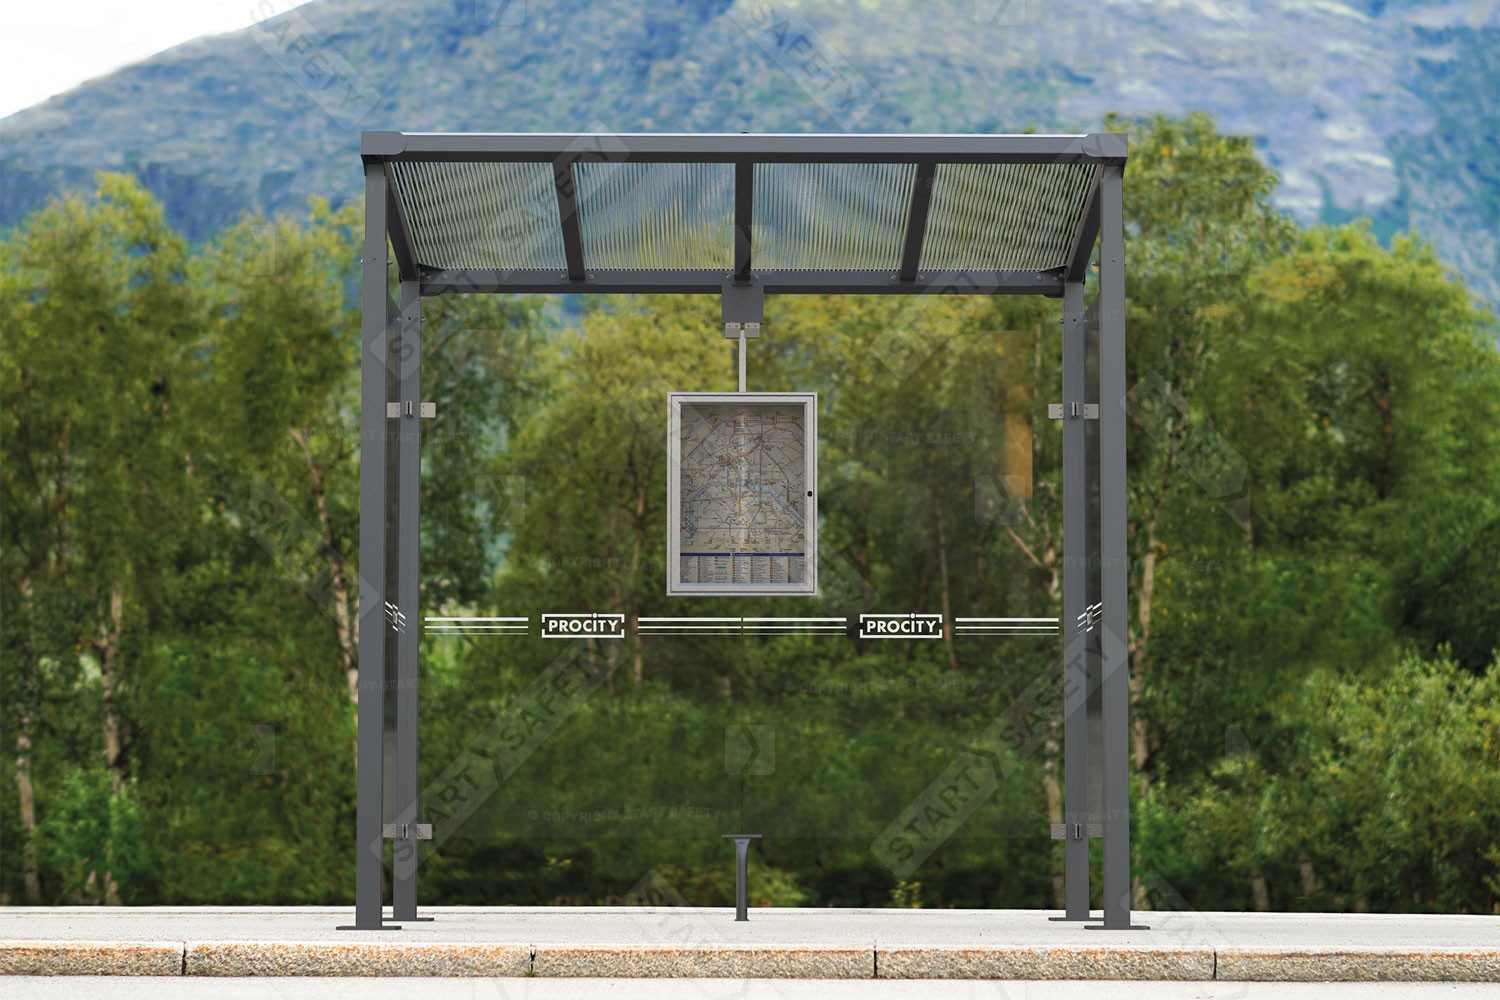 Procity Milan Bus Shelter Installed At Base of Scenic Hill